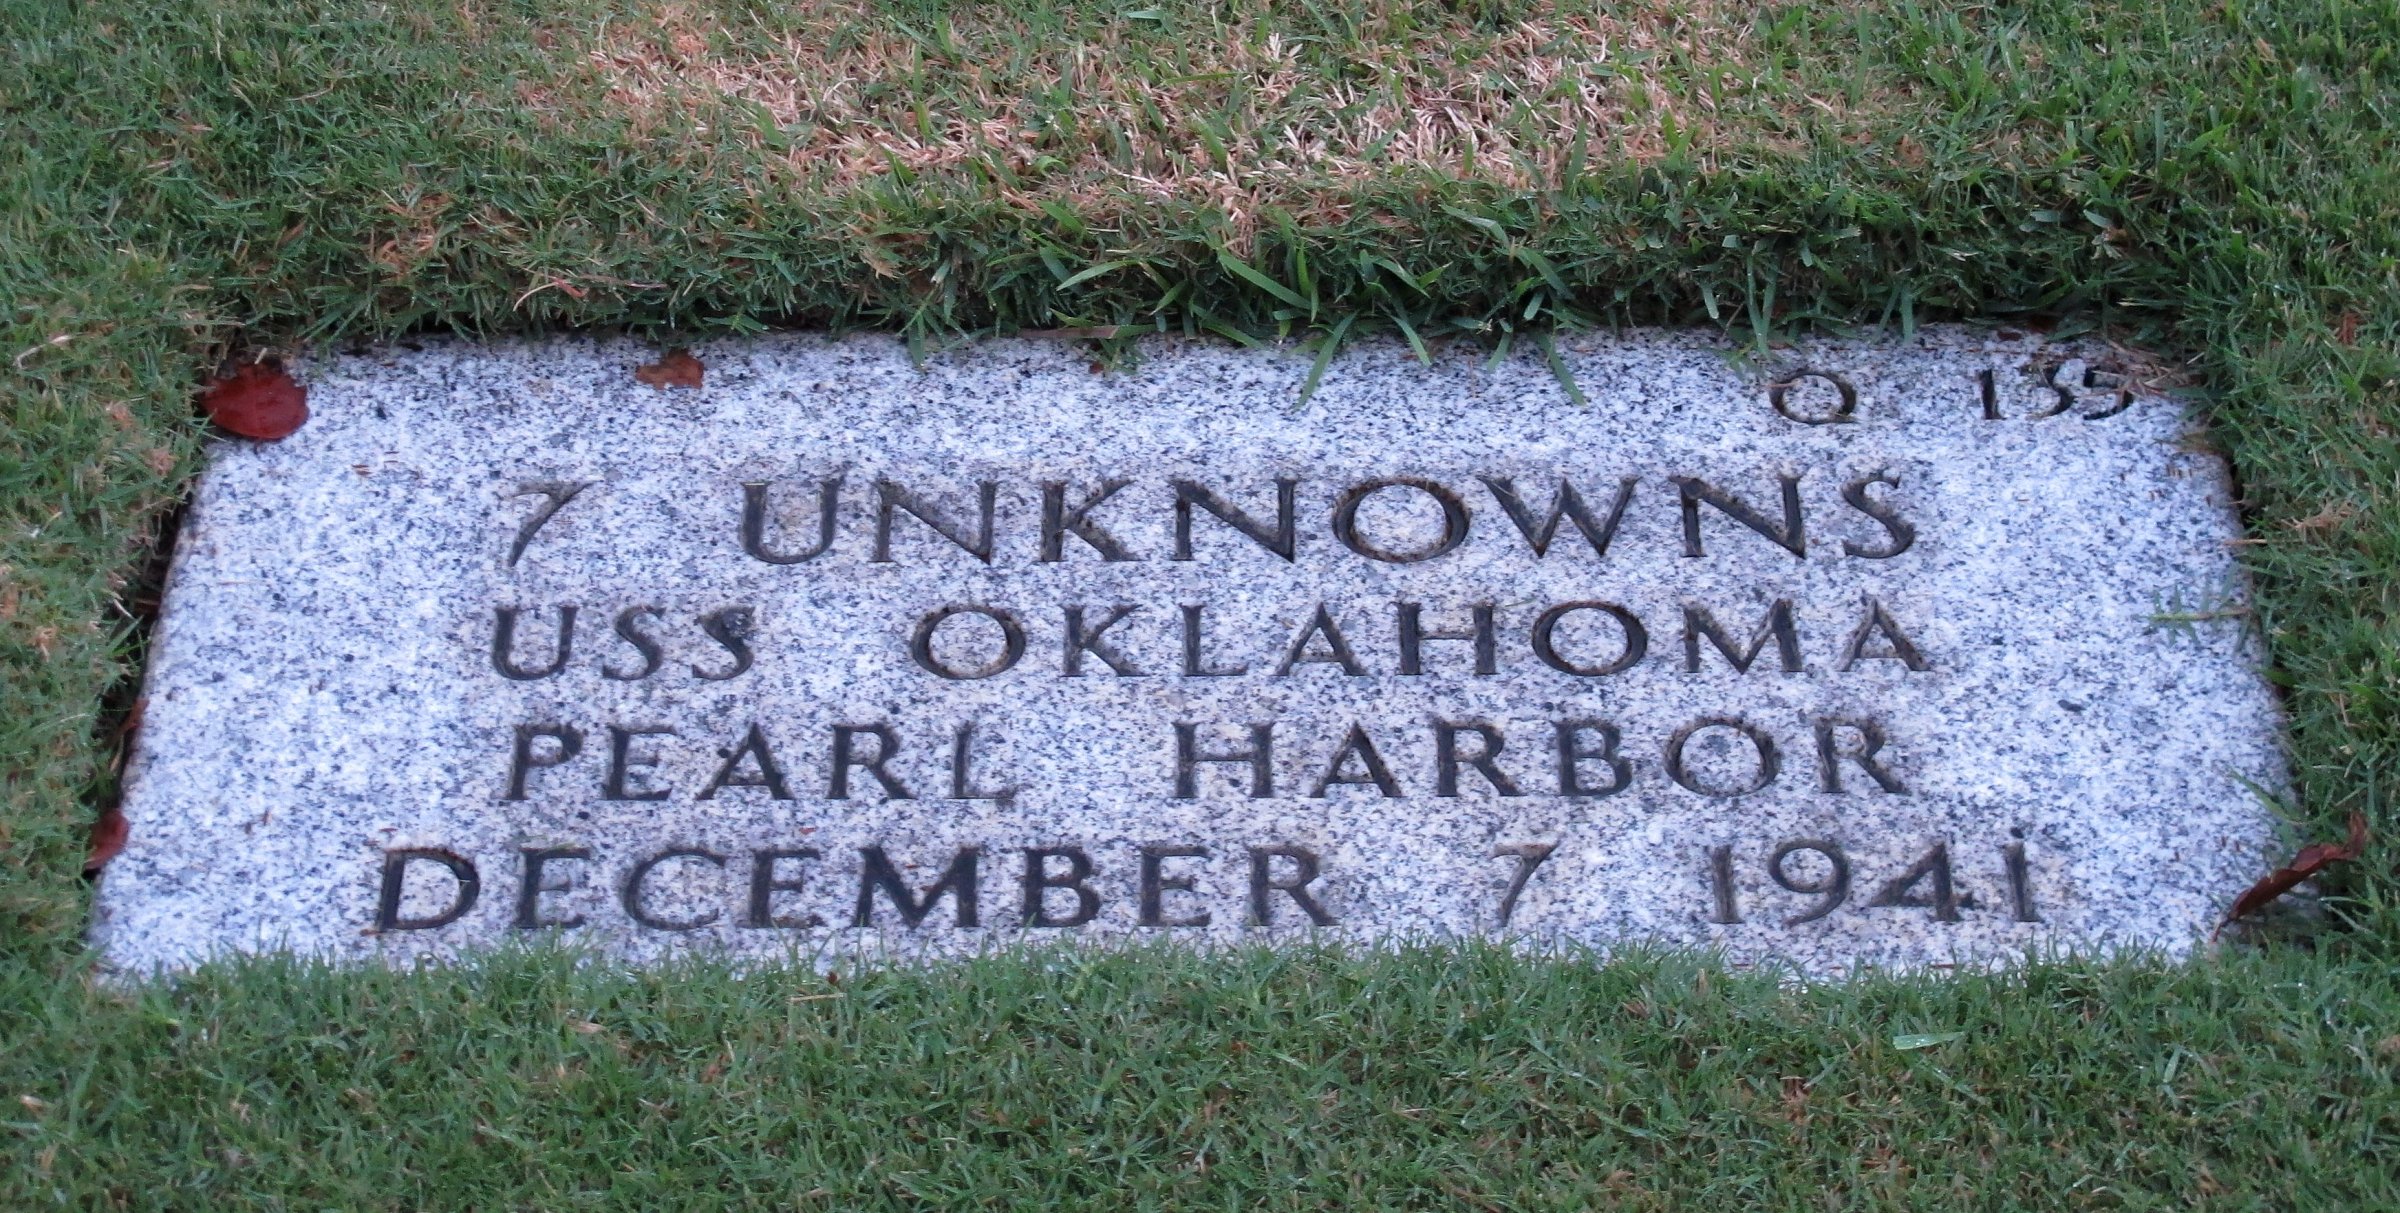 This Dec. 5, 2012 photo at the National Memorial Cemetery of the Pacific in Honolulu shows a gravestone of 7 unknowns from the USS Oklahoma